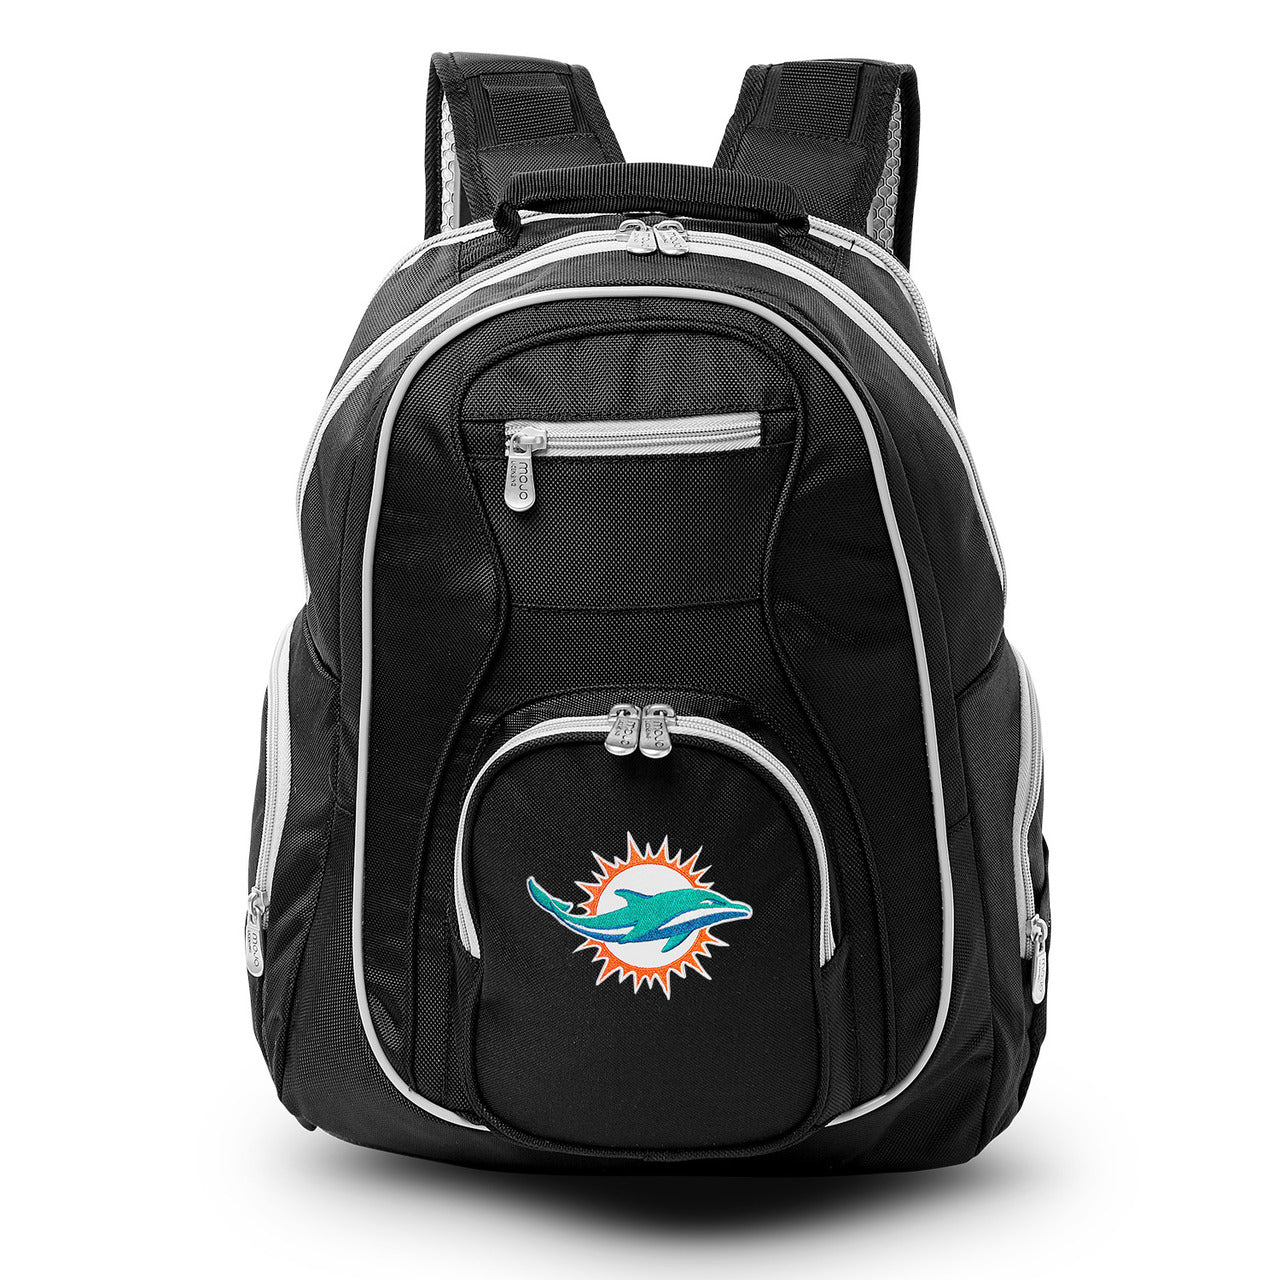 Miami Dolphins Backpack | Miami Dolphins Laptop Backpack